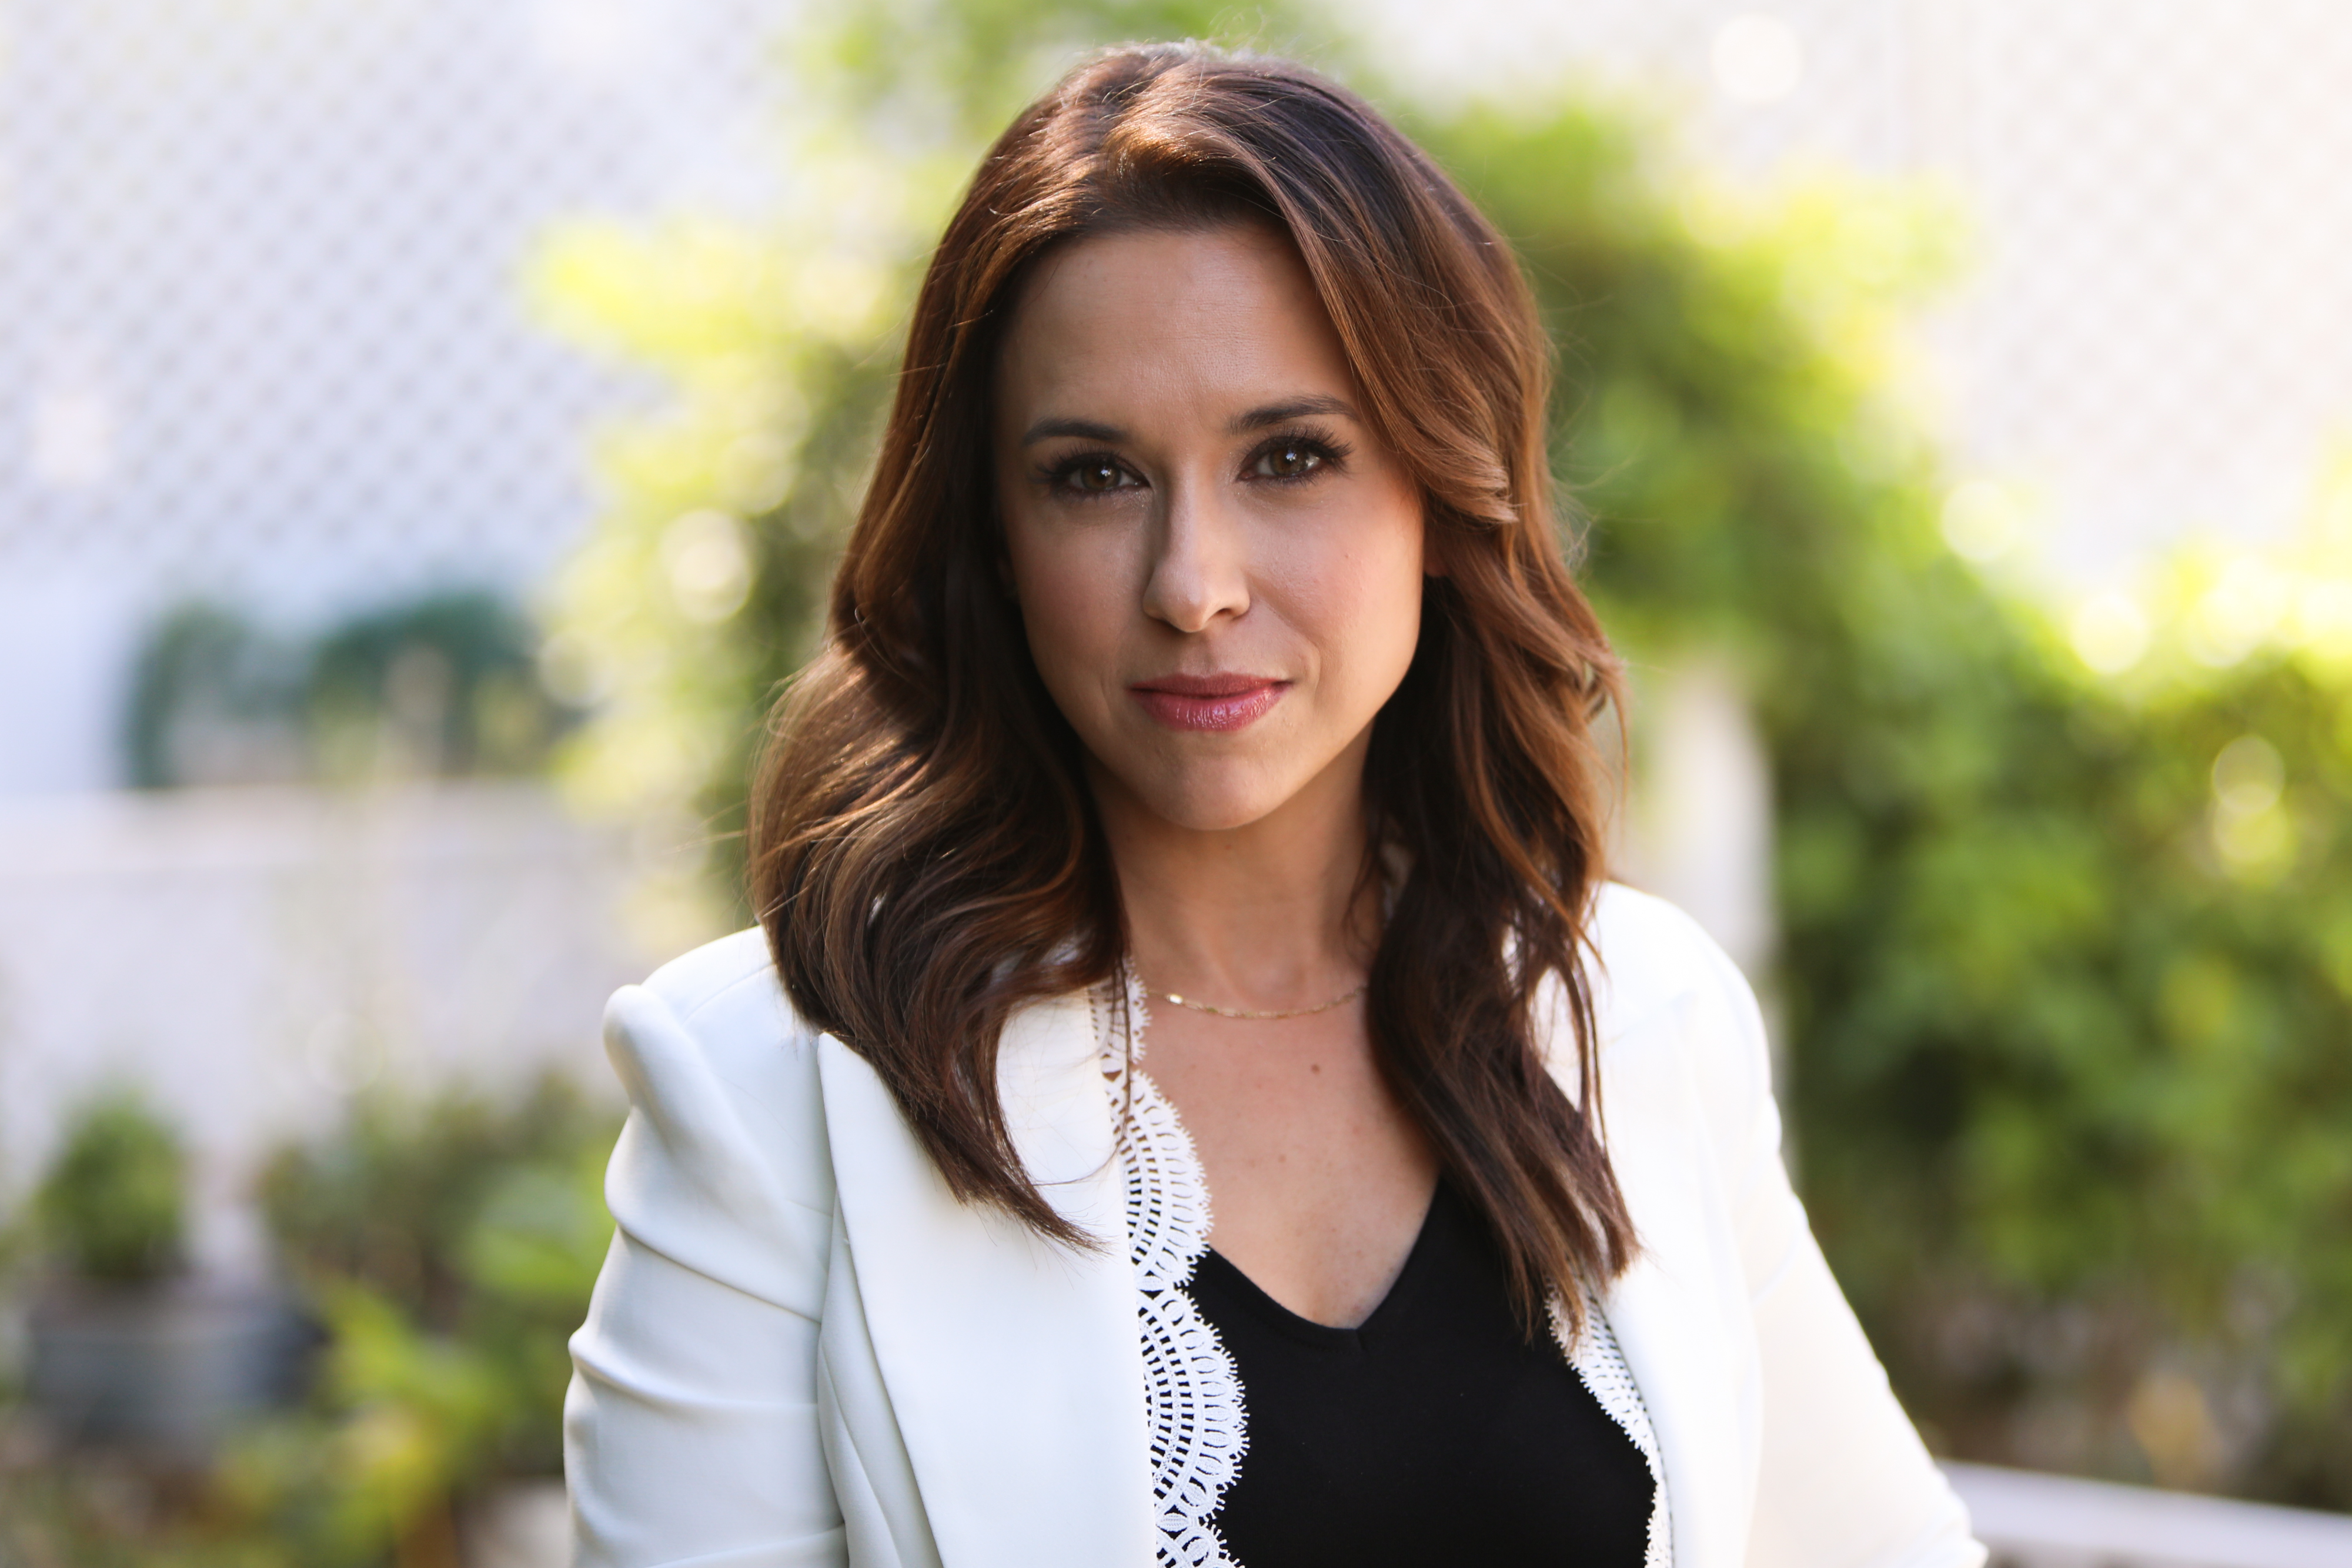 Lacey Chabert visits Hallmark Channel's "Home & Family" at Universal Studios Hollywood on October 23, 2019, in Universal City, California. | Source: Getty Images